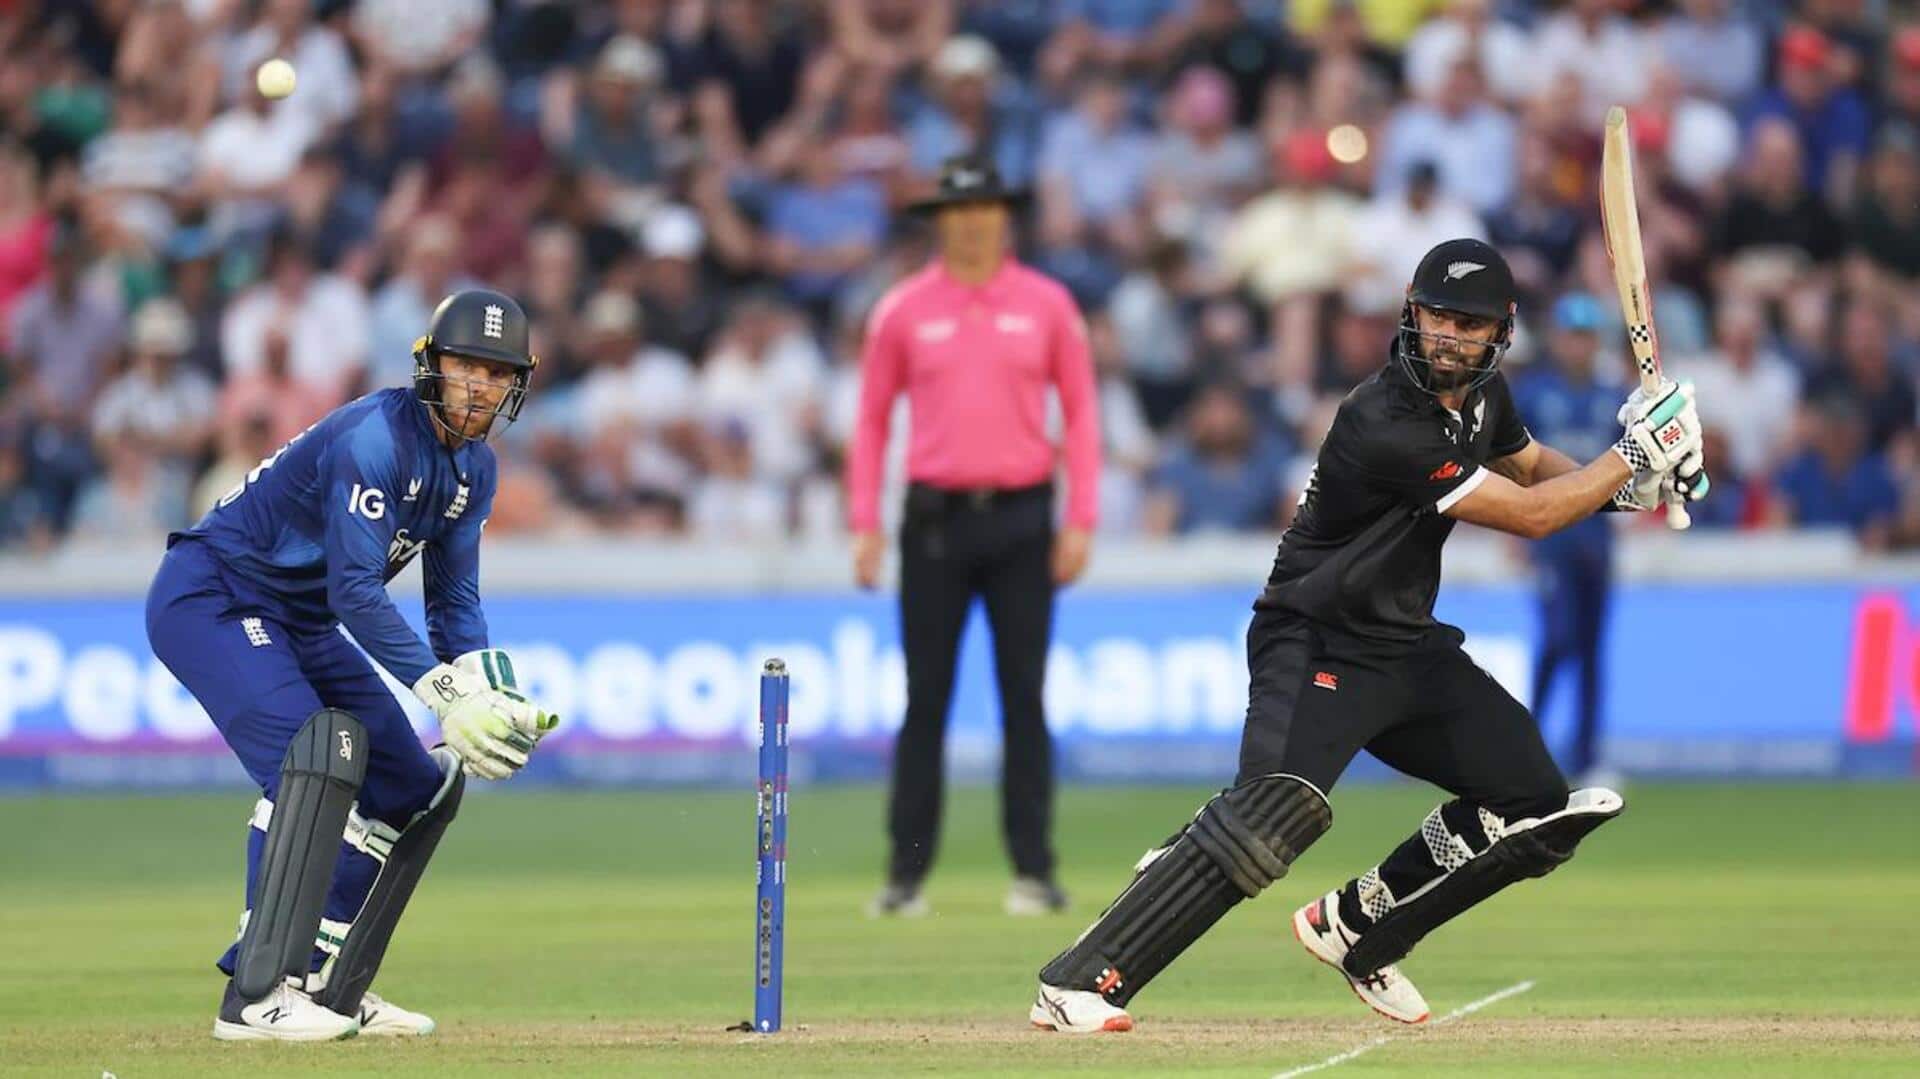 2nd ODI: England out to settle scores against New Zealand